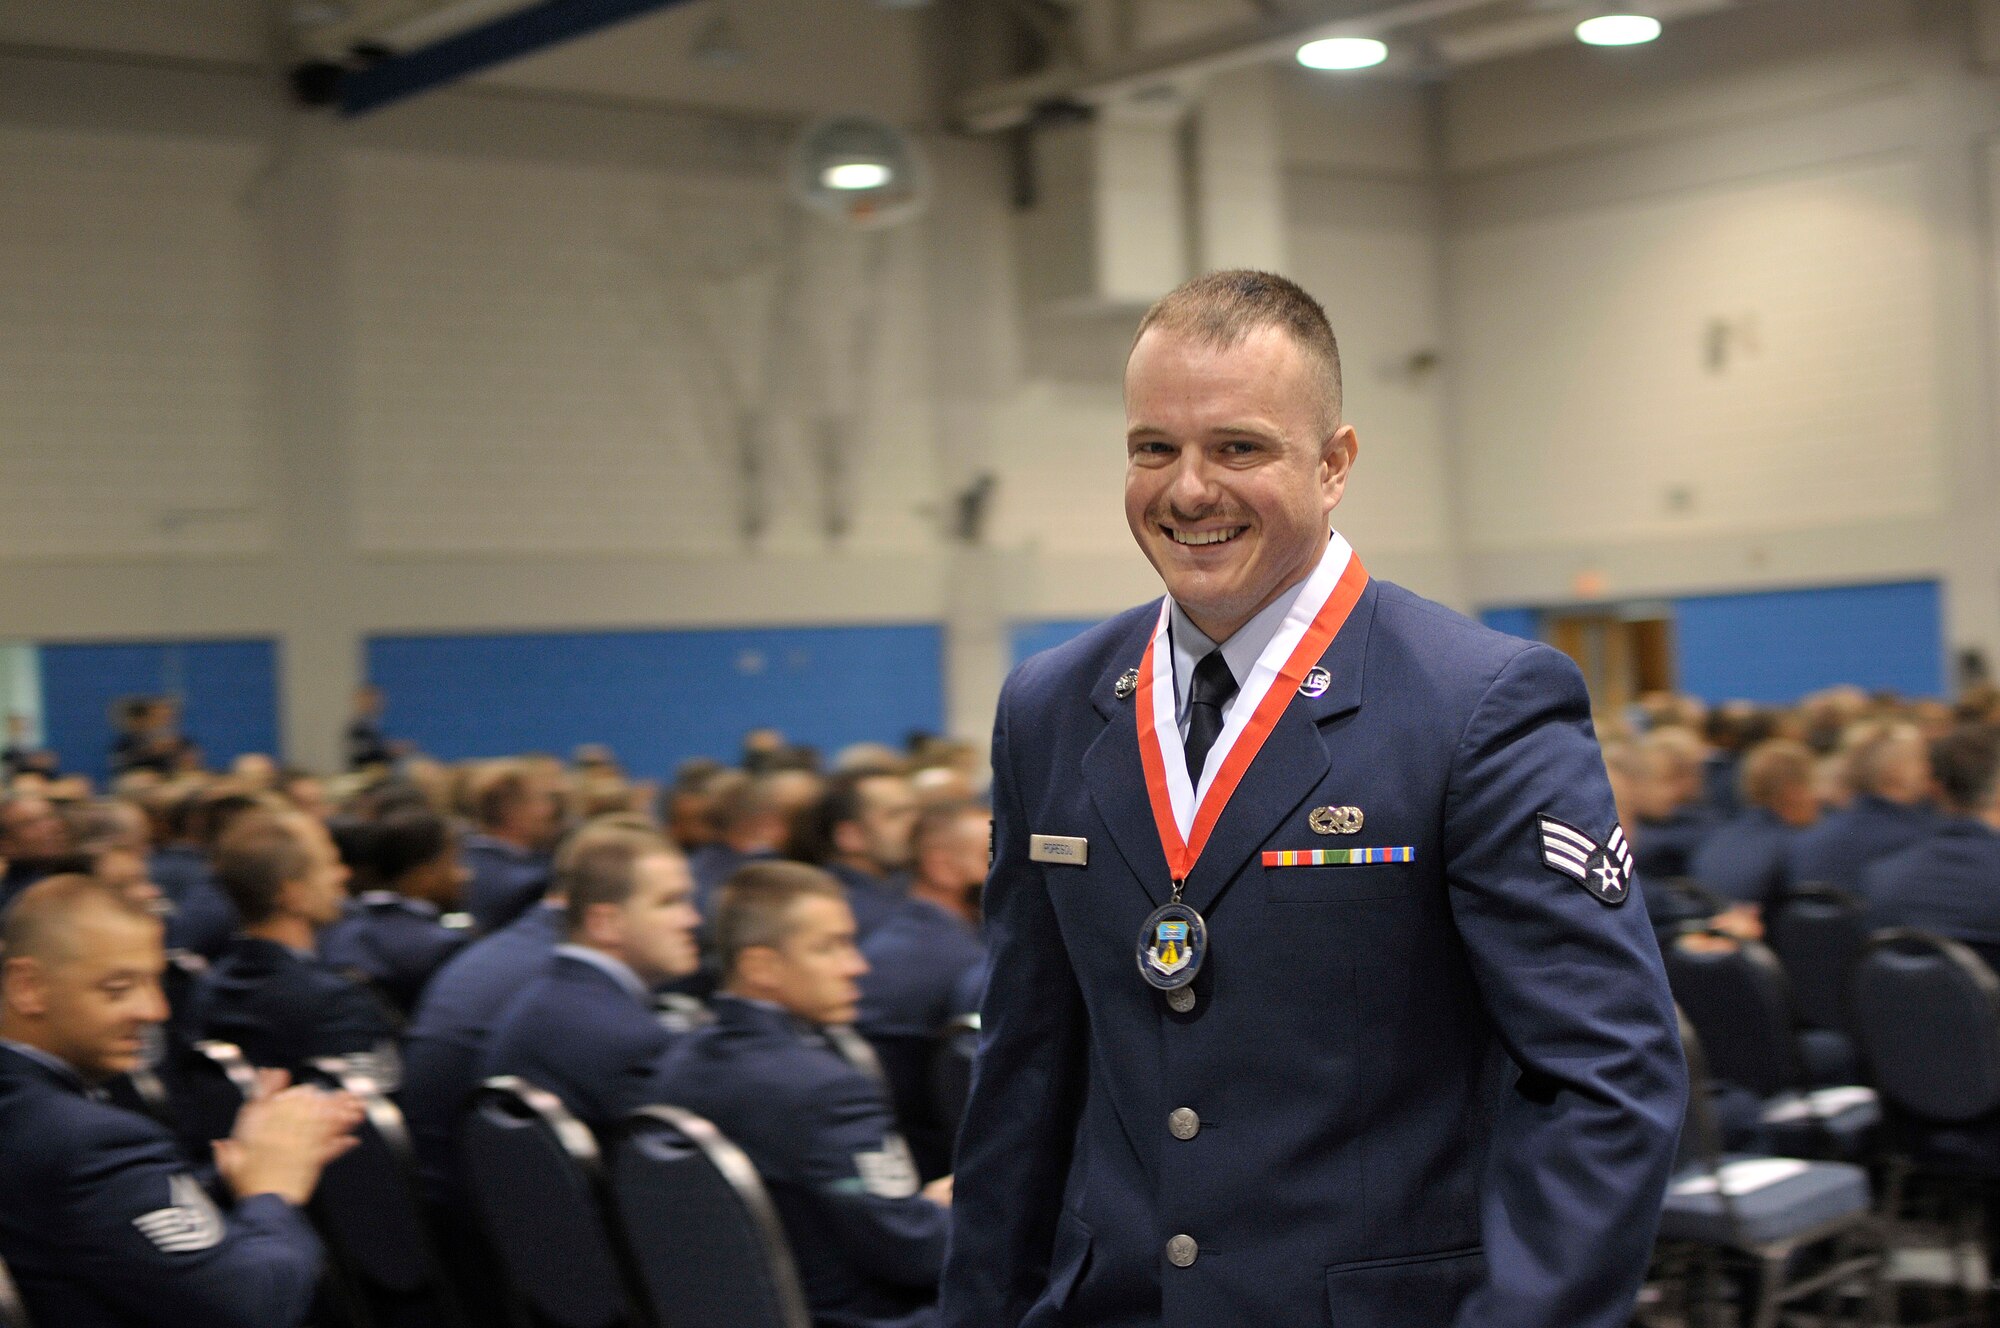 MCGHEE TYSON AIR NATIONAL GUARD BASE, Tenn. – U.S. Air National Guard Senior Airman Victor Popescu, from Ohio, is called to the stage for earning the Academic Achievement Award for Airman Leadership School. Popescu graduated with others from his ALS class as well as Noncommissioned Officer Academy graduates May 23, 2013, from the Paul H. Lankford Enlisted Professional Military Education Center. Their ceremony featured guest speaker Chief Master Sgt. Richard A. "Andy" Kaiser, command chief of U.S. Air Force Air Mobility Command. (U.S. Air National Guard photo by Master Sgt. Mike R. Smith/Released)